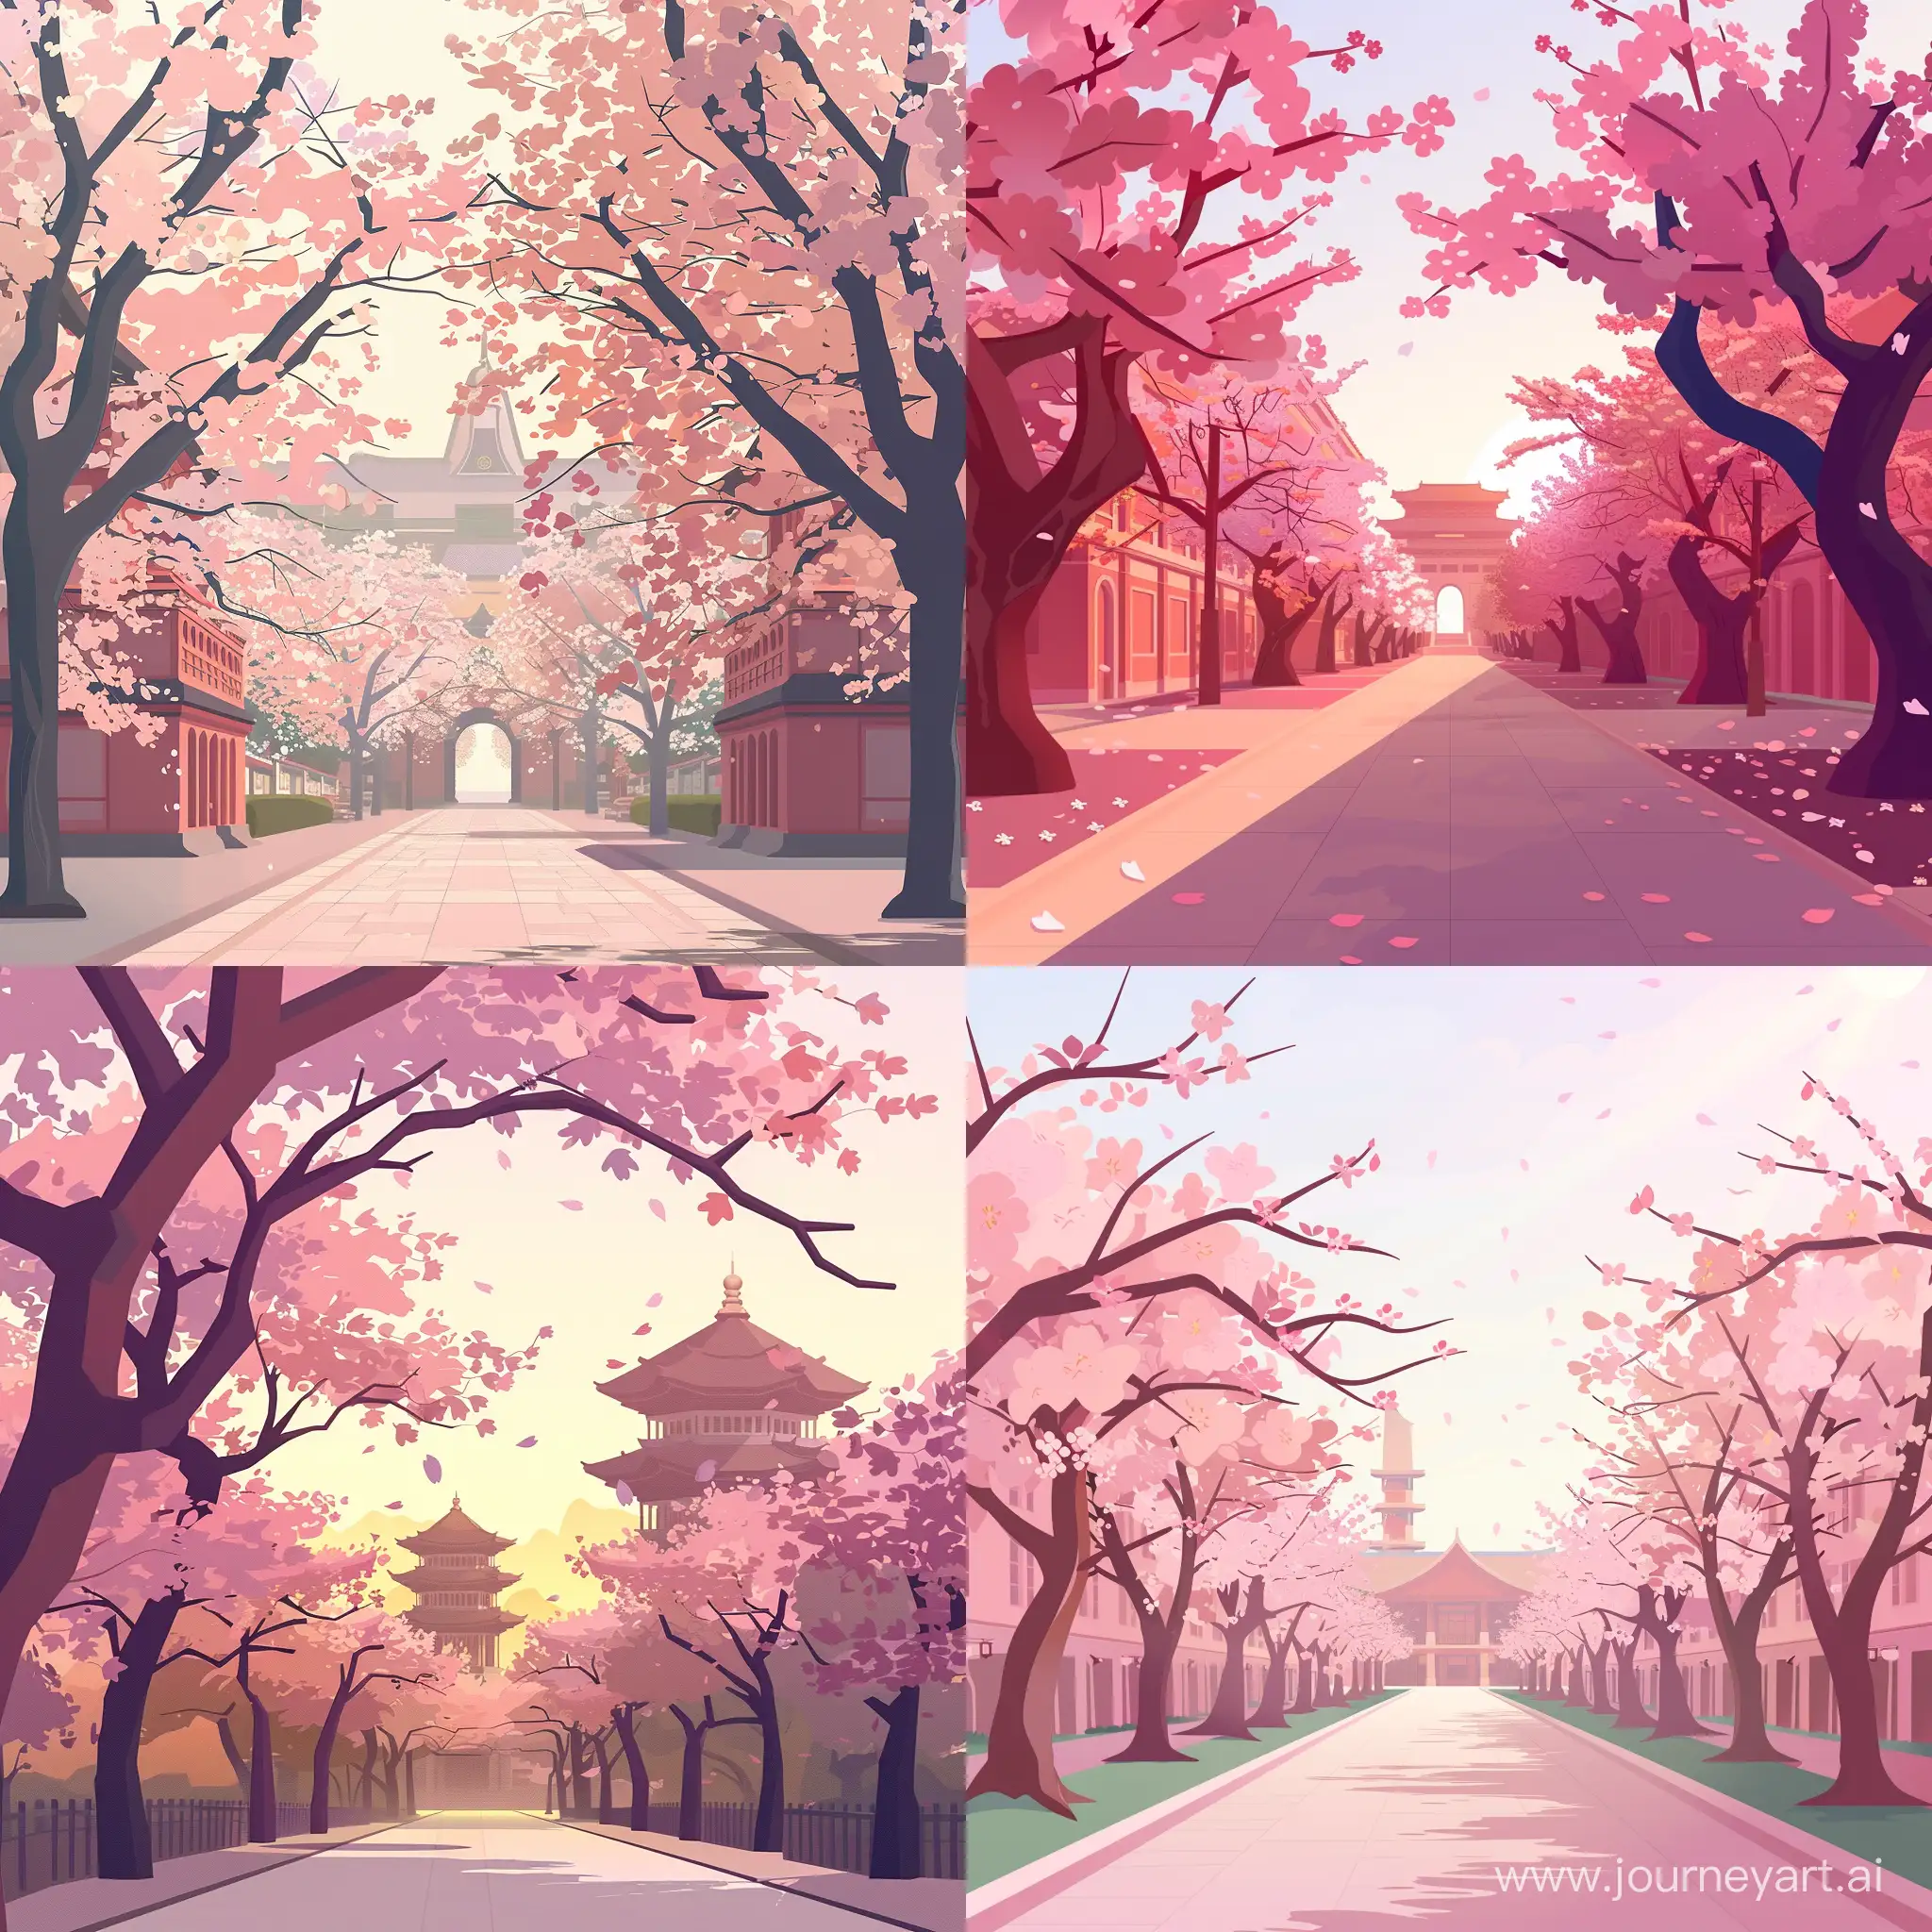 HD illustration of cherry blossom spectacle at Wuhan University's Cherry Blossom Avenue. the morning sunlight illuminating the blossoms, creating a mesmerizing scene of nature blending seamlessly with the historic architecture in the background, in high quality details in flat style